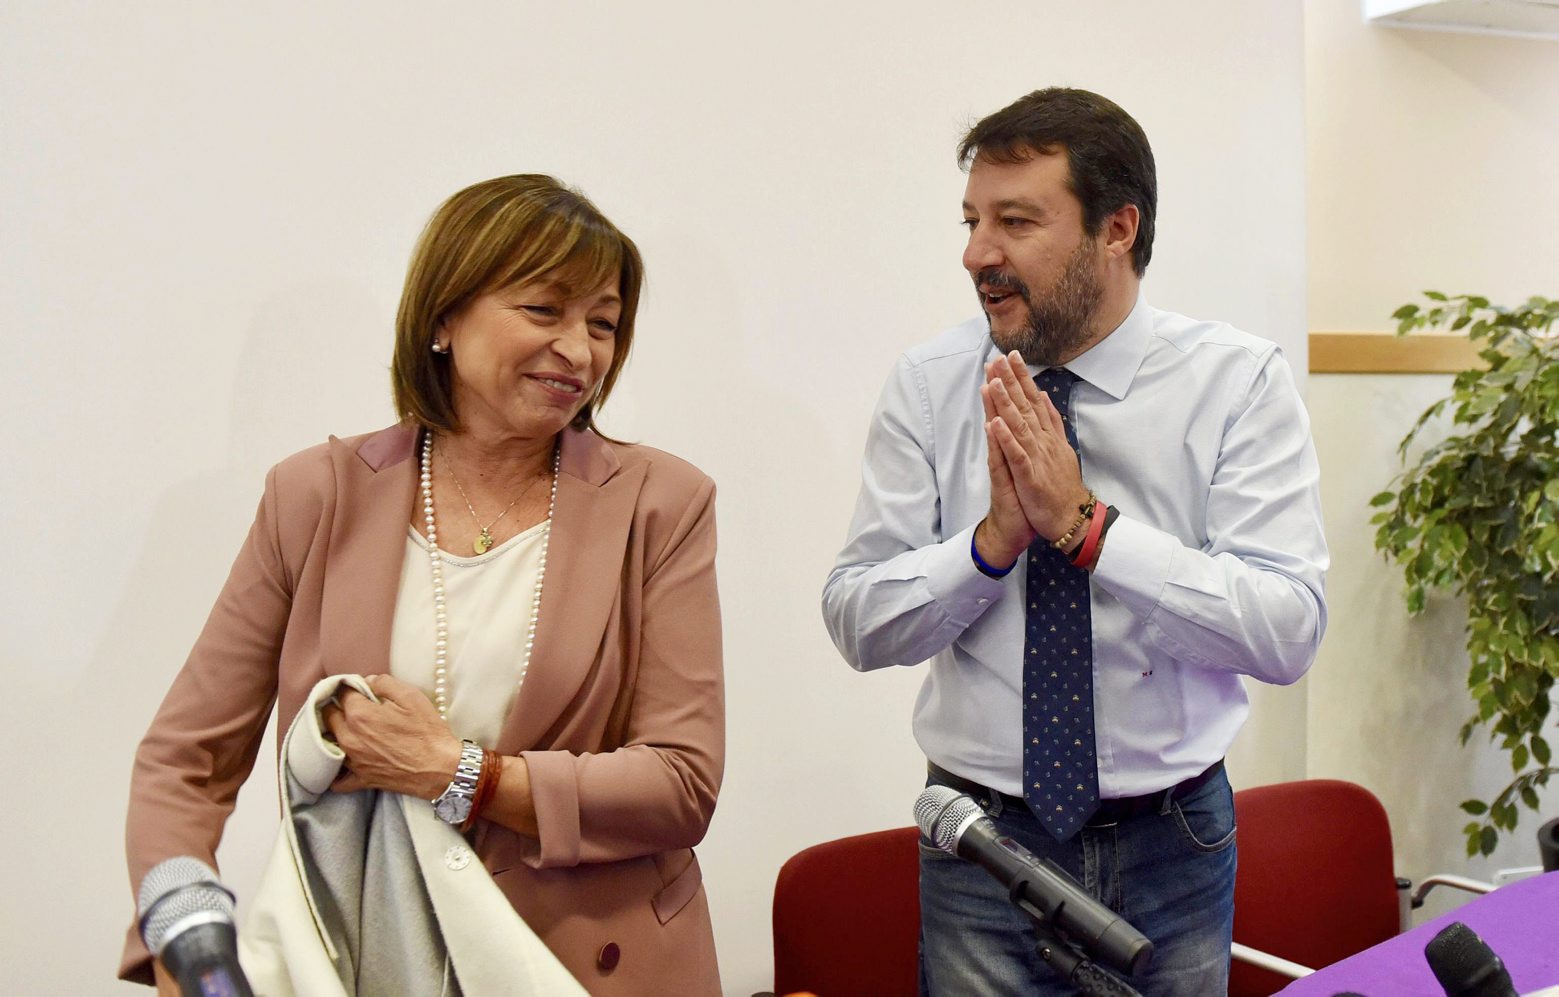 epa07955901 Centre-right coalition candidate for the Precidency of Umbria Region, Donatella Tesei celebrates victorry with secretary of Lega party Matteo Salvini (R) in Perugia, Italy, 28 October 2019. Donatella Tesei, candidate of the center right, is now also formally the new president of the Umbria Region.  EPA/MATTEO CROCCHIONI ITALY PARTIES SALVINI